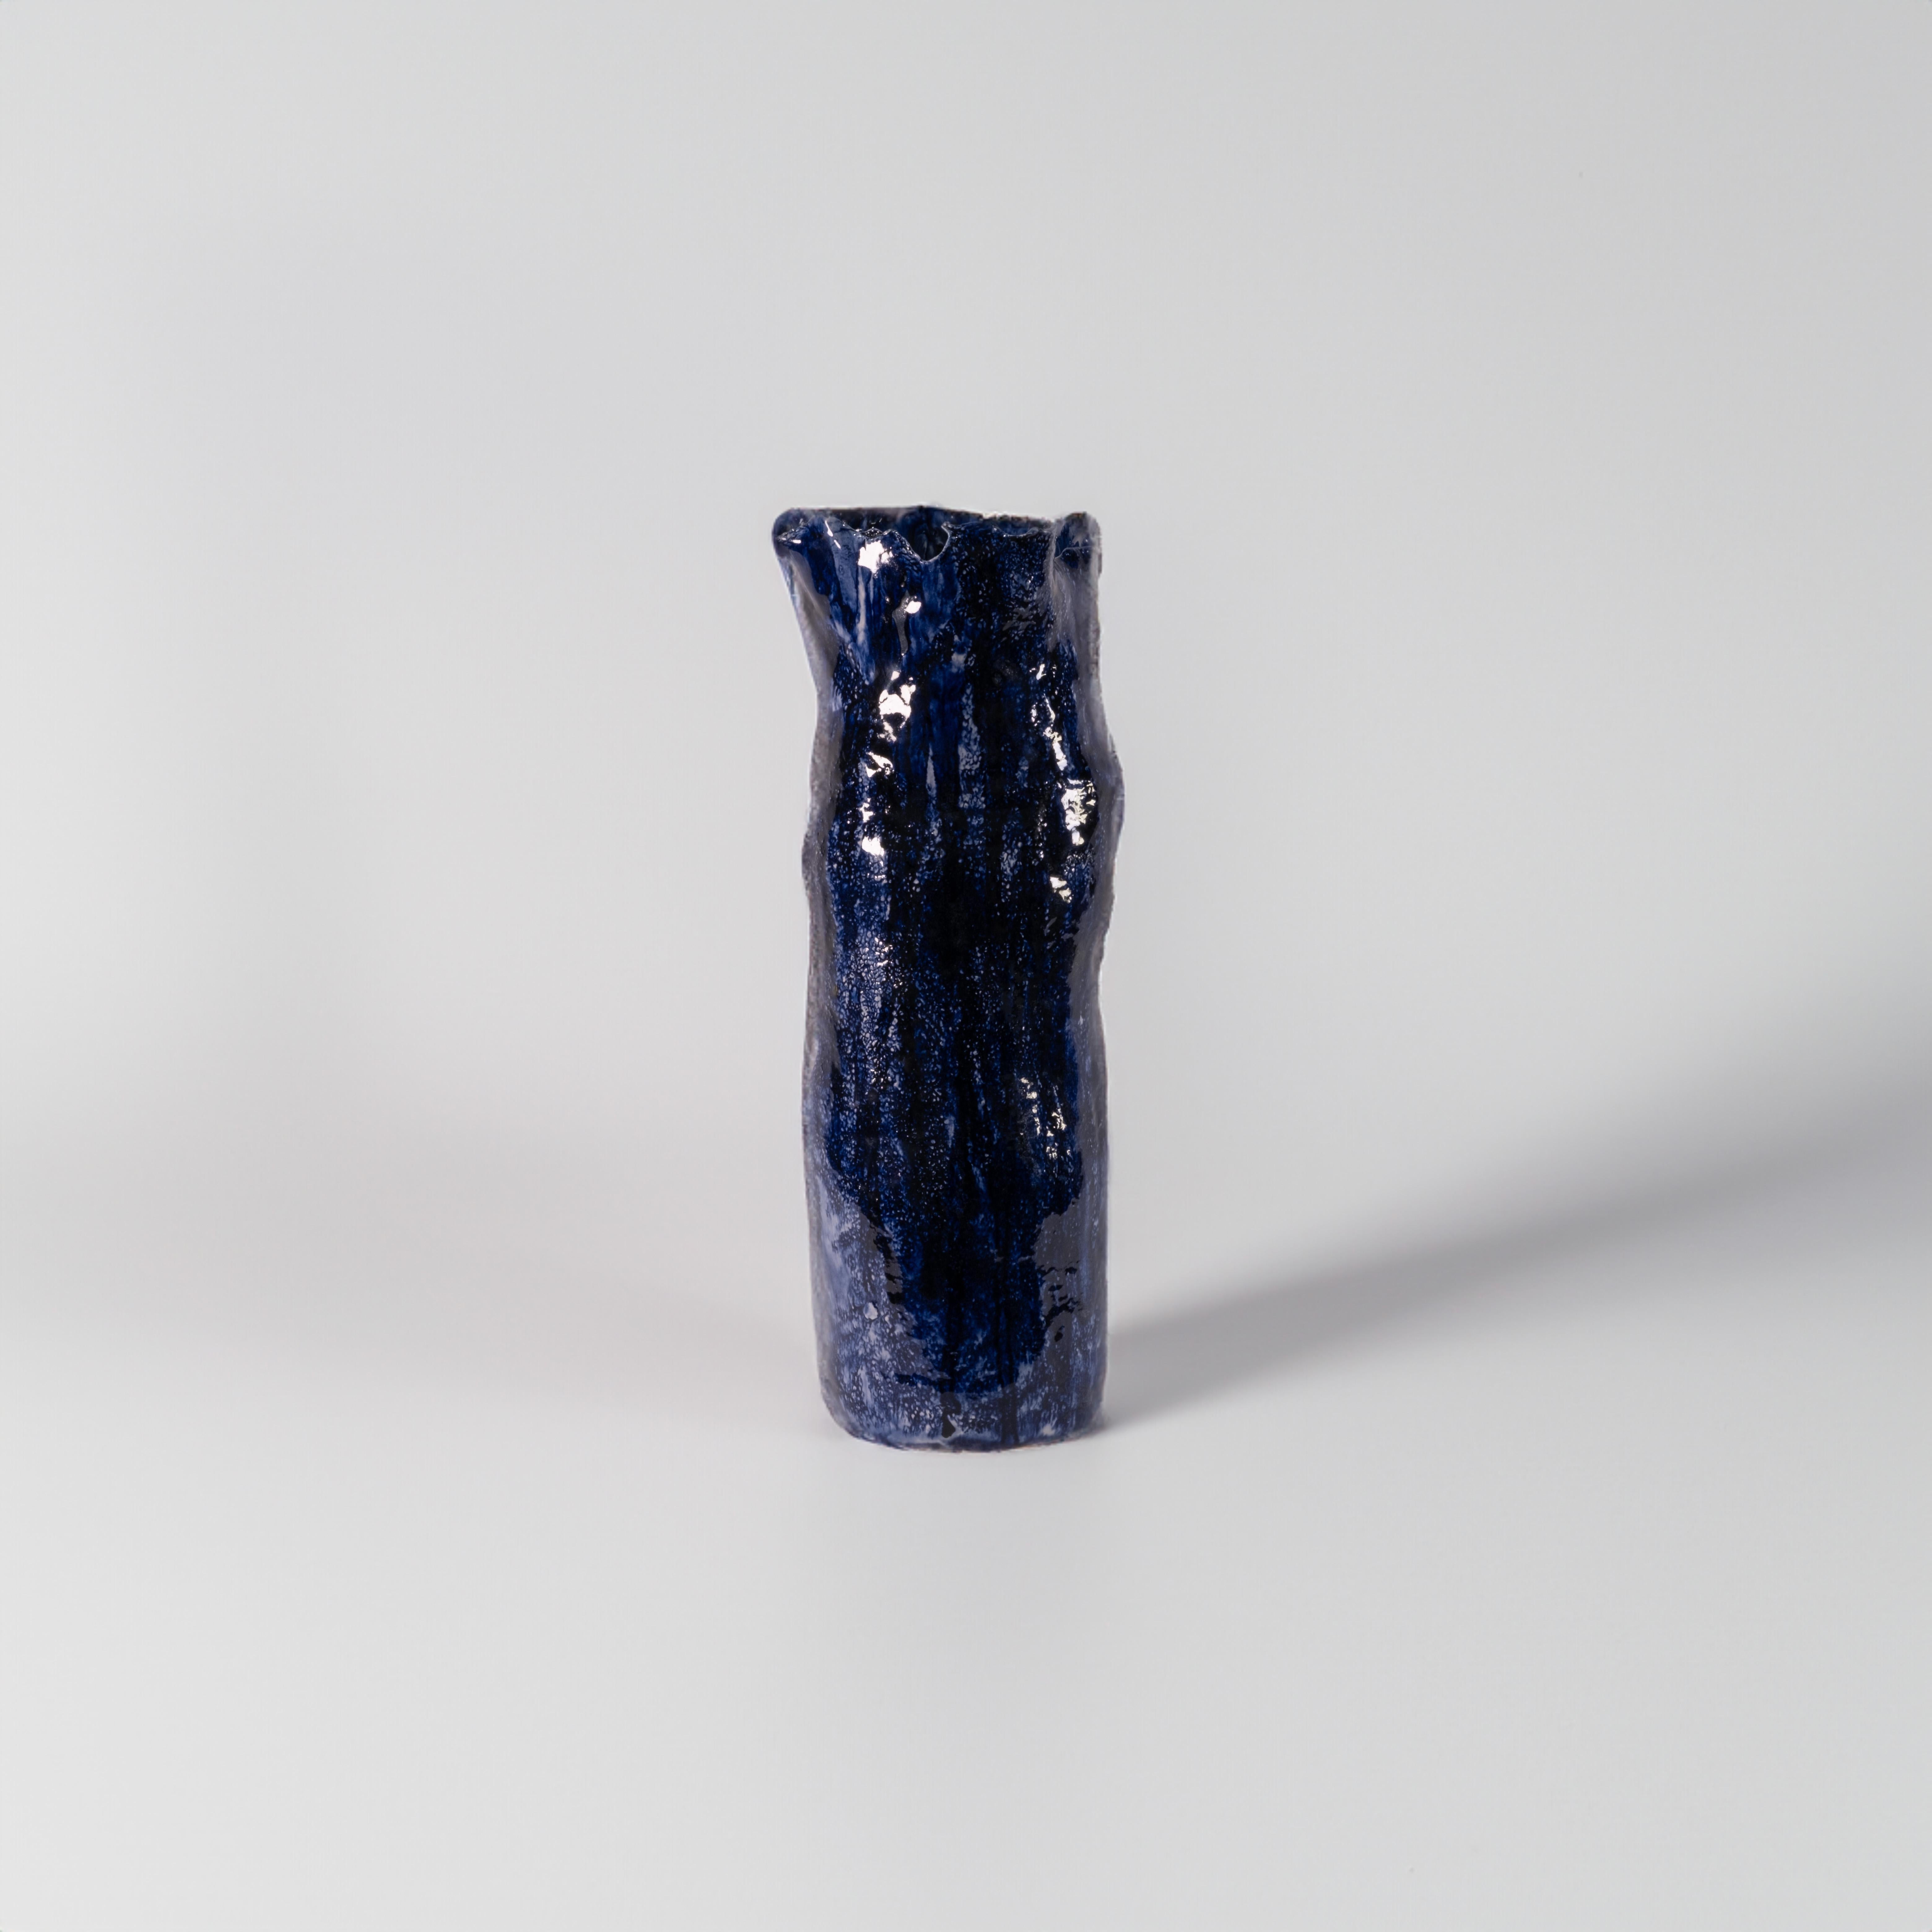 Alex Muradian's ceramics capture the essence of his experiences in both the English countryside and the coastal beaches where he currently resides. Each piece is handbuilt, showcasing the artist's devotion to craftsmanship. The glazes employed by